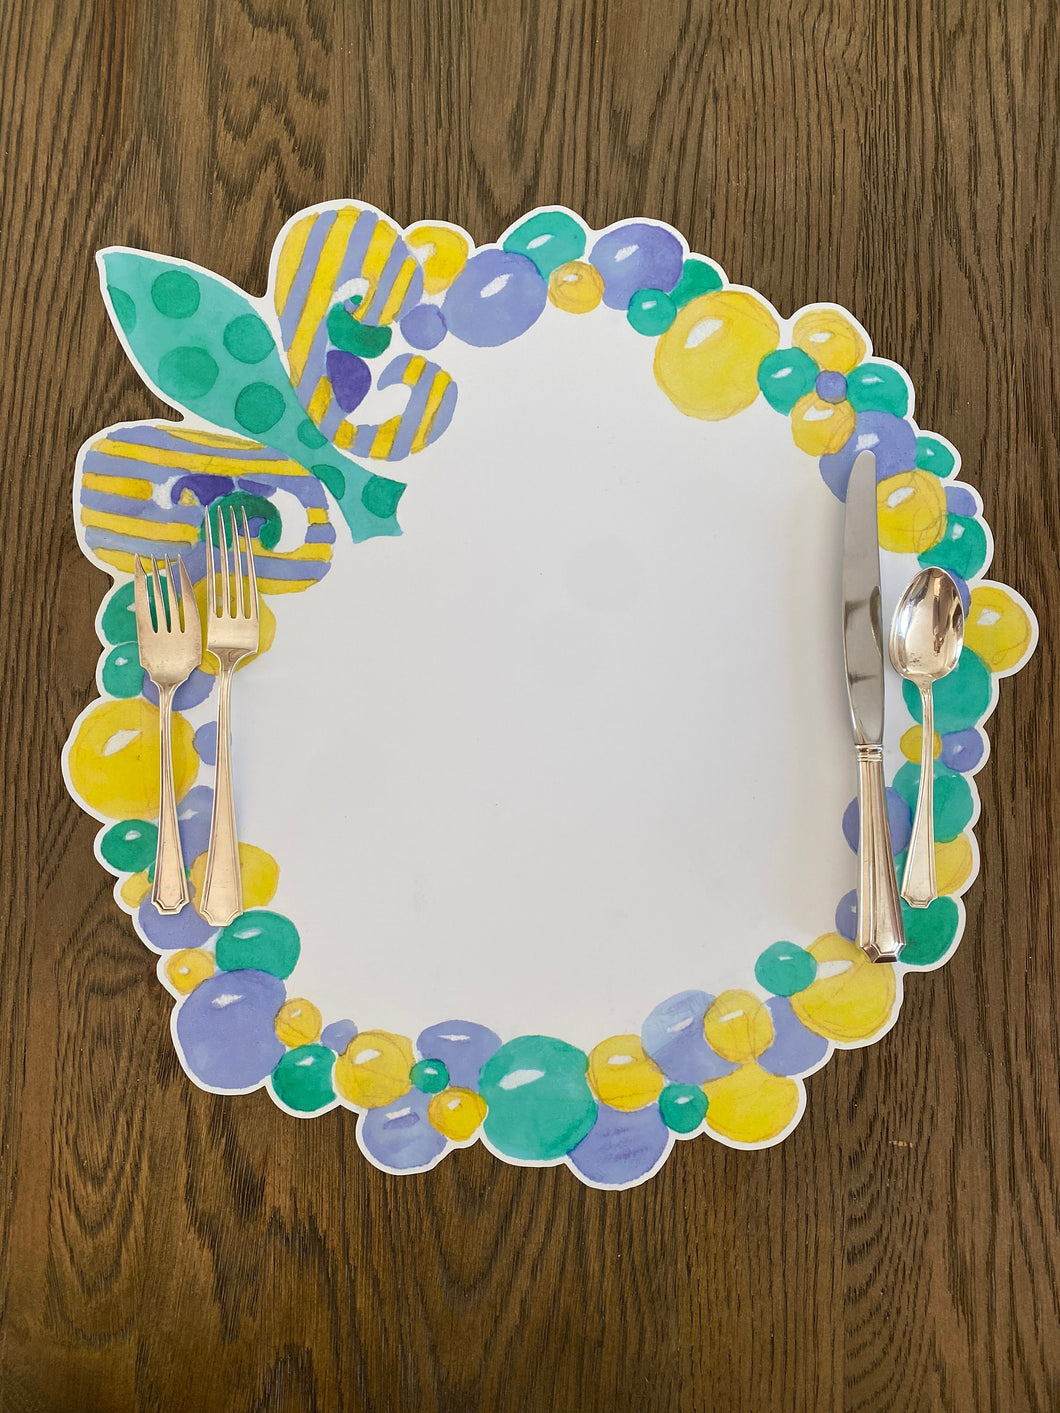 Mardi Gras Placemat- Bead Wreath Louisiana New Orleans Purple Green Gold Carnival Table Setting Throw me something mister Krewe